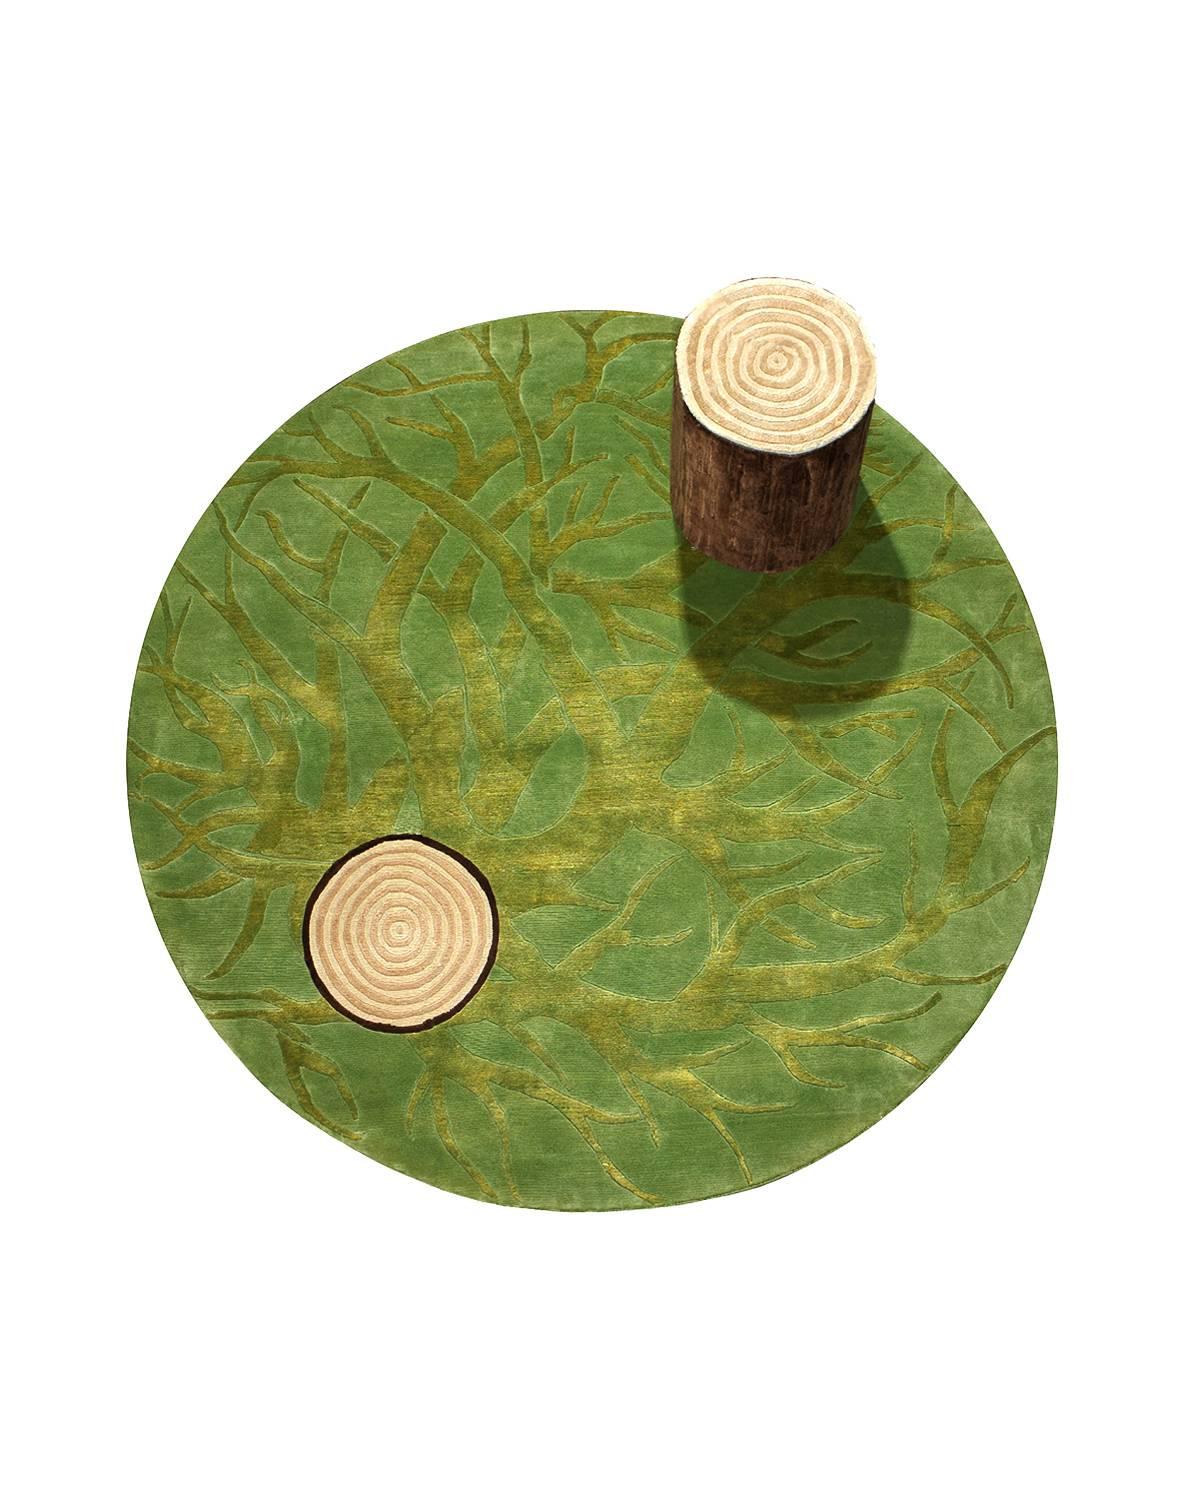 This round rug in a Mexican contemporary design, woven by Odabashian's network of family-owned weavers near Mirzapur, India with the finest New Zealand wool. The design was created by renowned Mexican designer Ariel Rojo for the 2011 exhibition